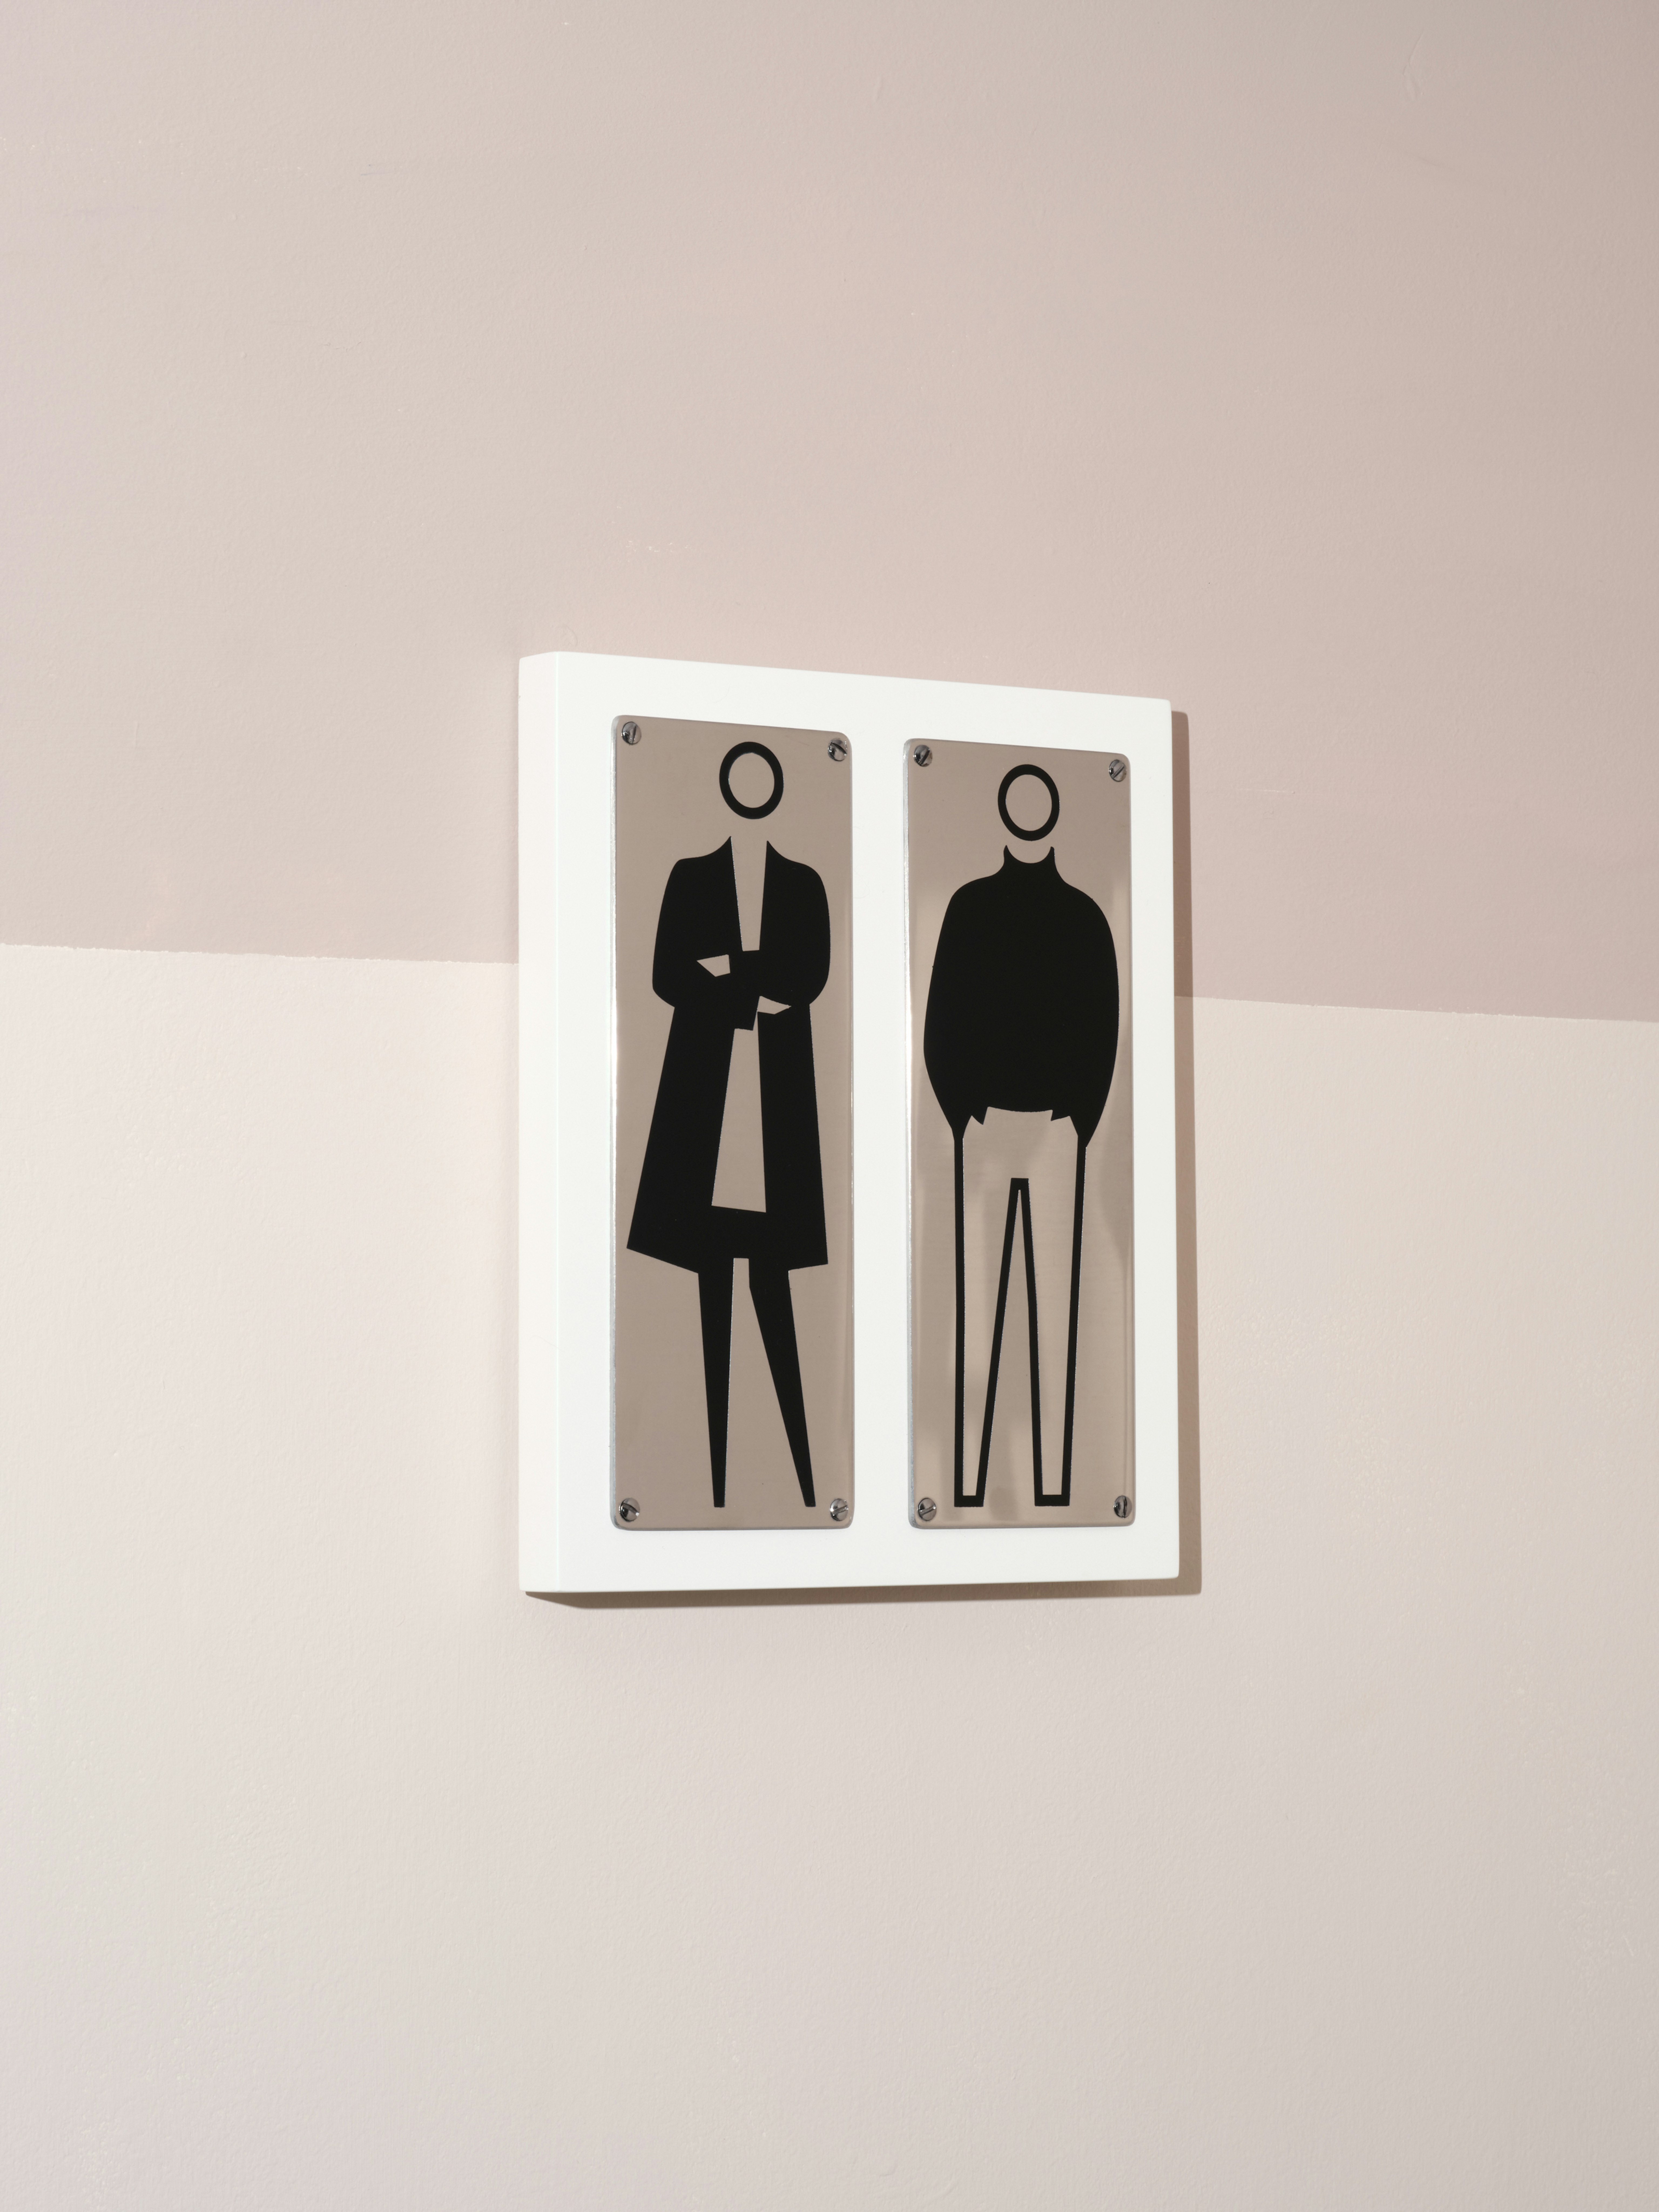 installation photograph of paint on etched stainless steel by Julian Opie depicting a woman and a man